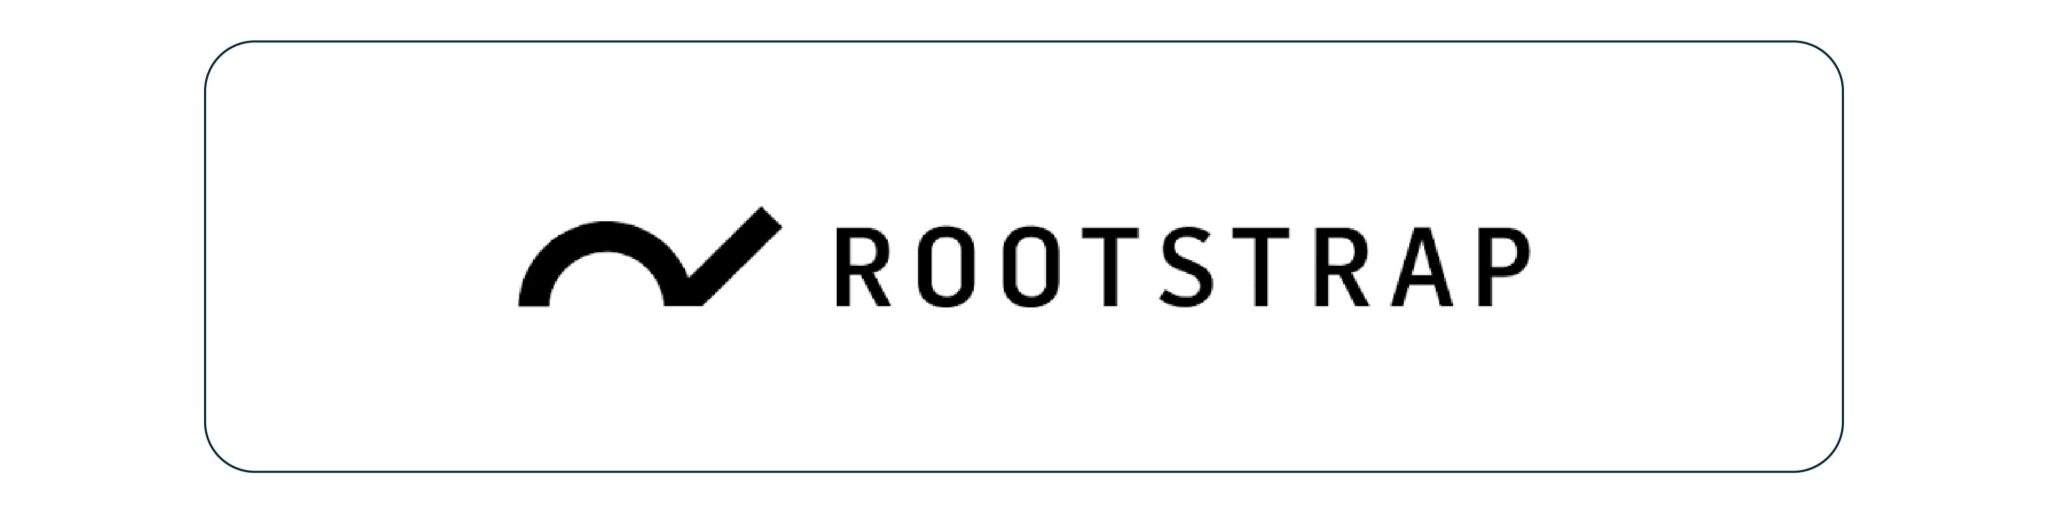 Rootstrap is the best SaaS development company on the US market